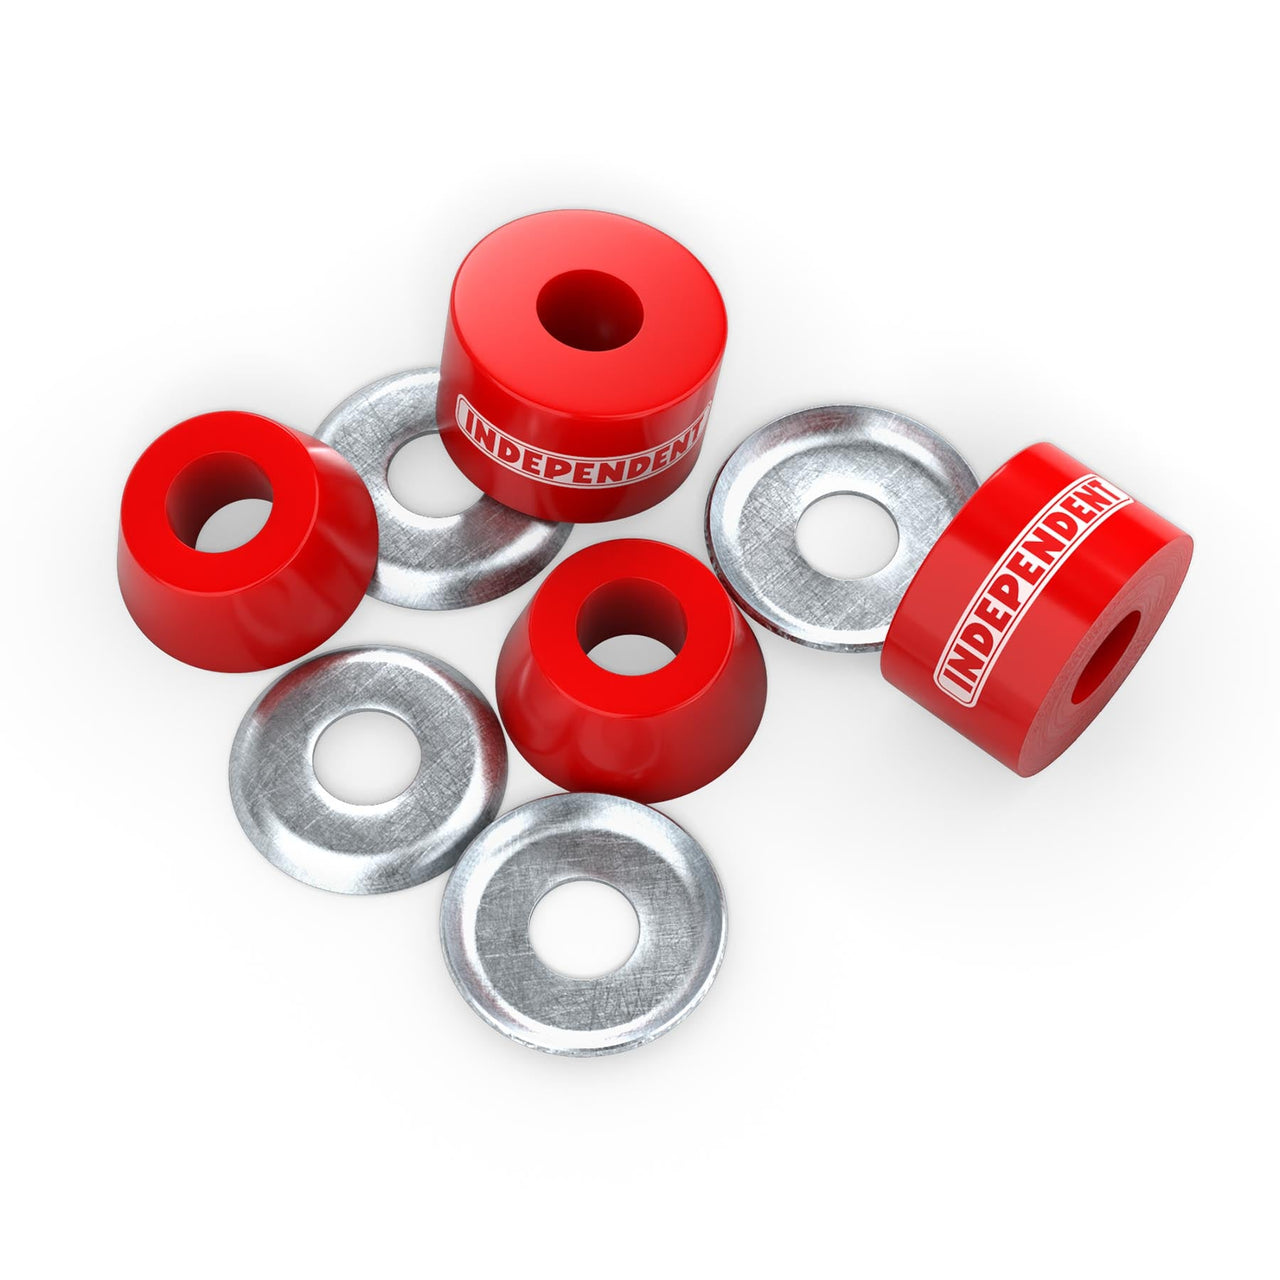 Independent Genuine Parts Original Cushions Soft 90a Bushings - Red image 2